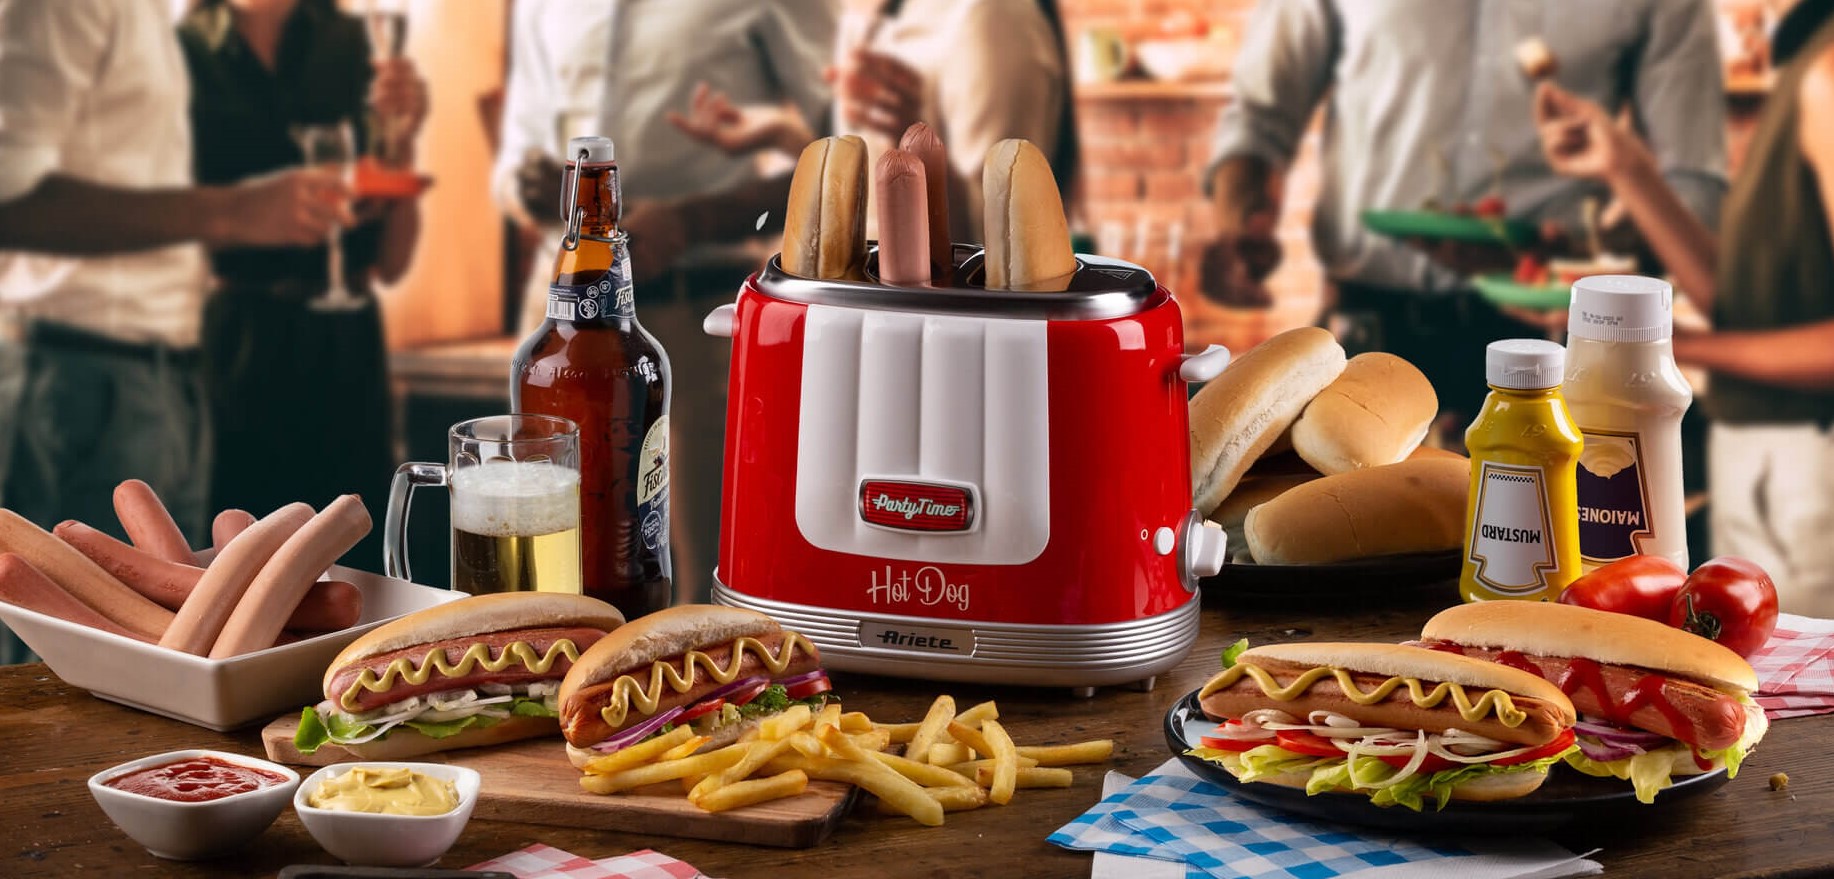 ariete-hot-dog-party-time